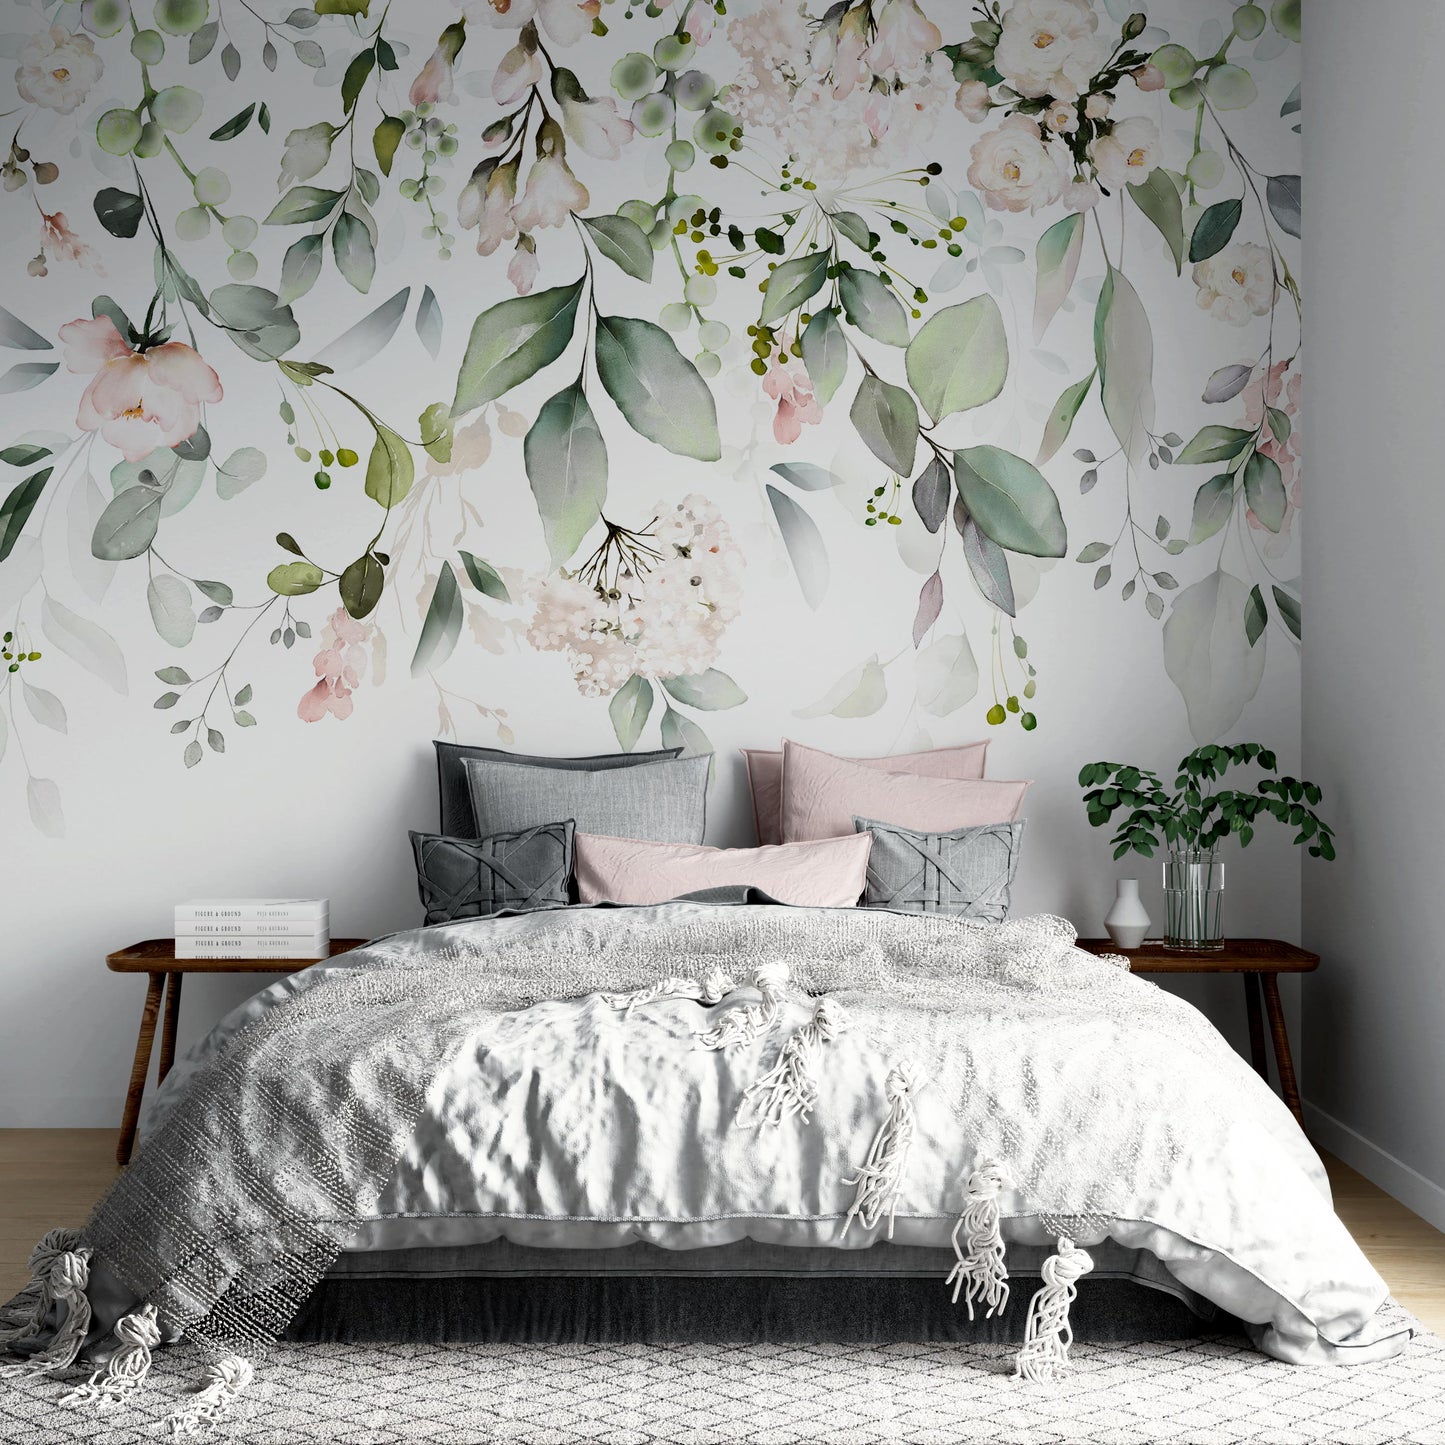 Minimalist Bedroom with Grey and Pink Accents:  Removable sage green botanical wallpaper complements grey and pink accents in minimalist bedroom.